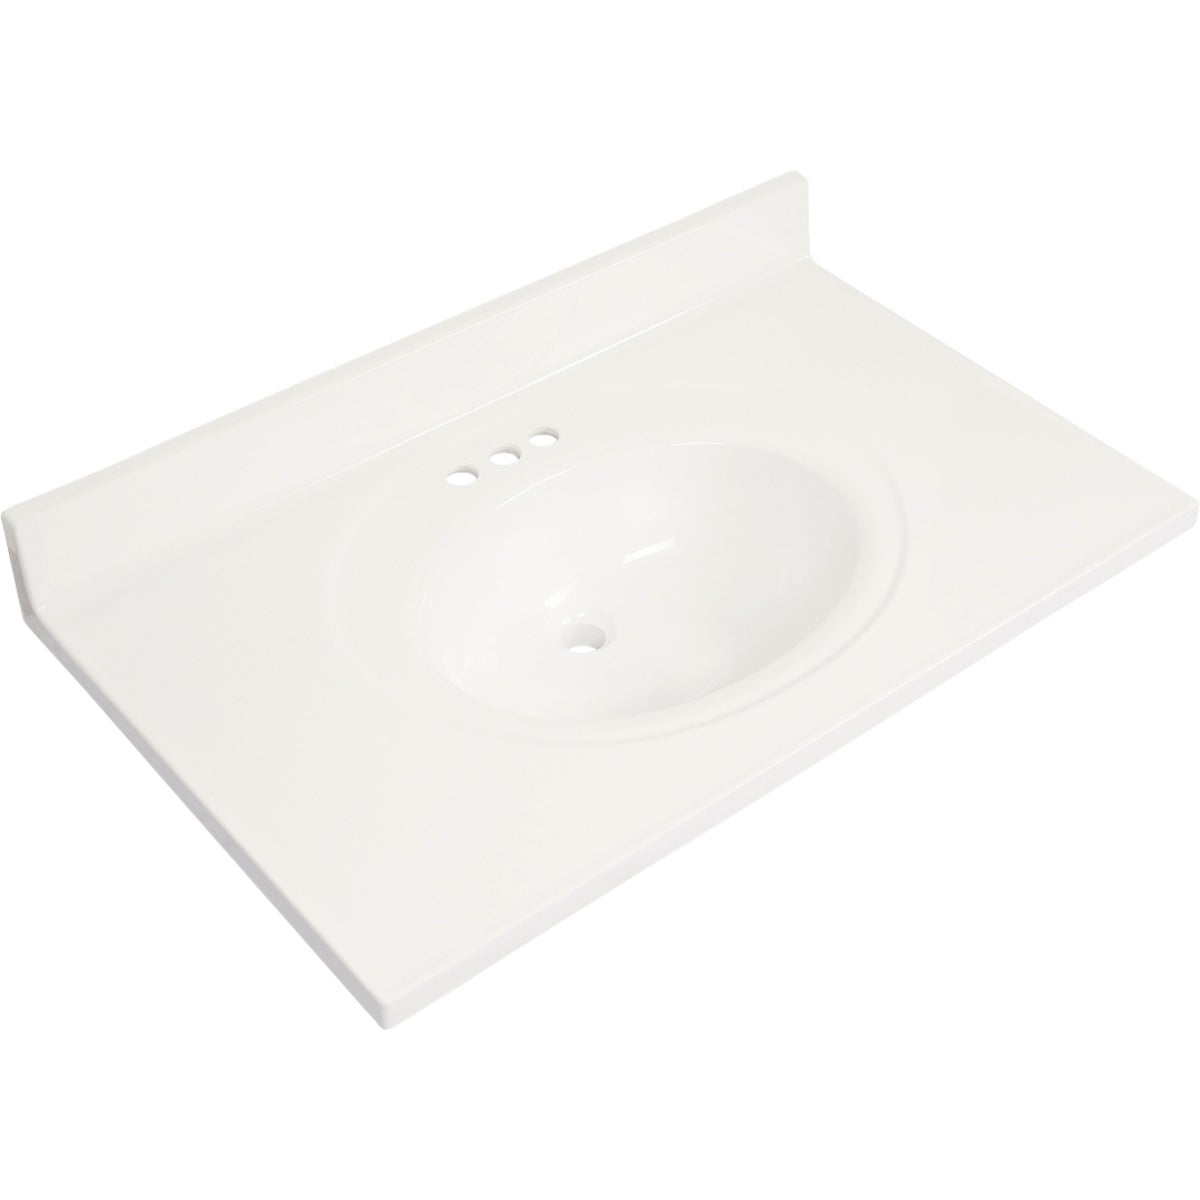 Modular Vanity Tops 37 In. W x 22 In. D Solid White Cultured Marble Flat Edge Single Sink Vanity Top with Oval Bowl